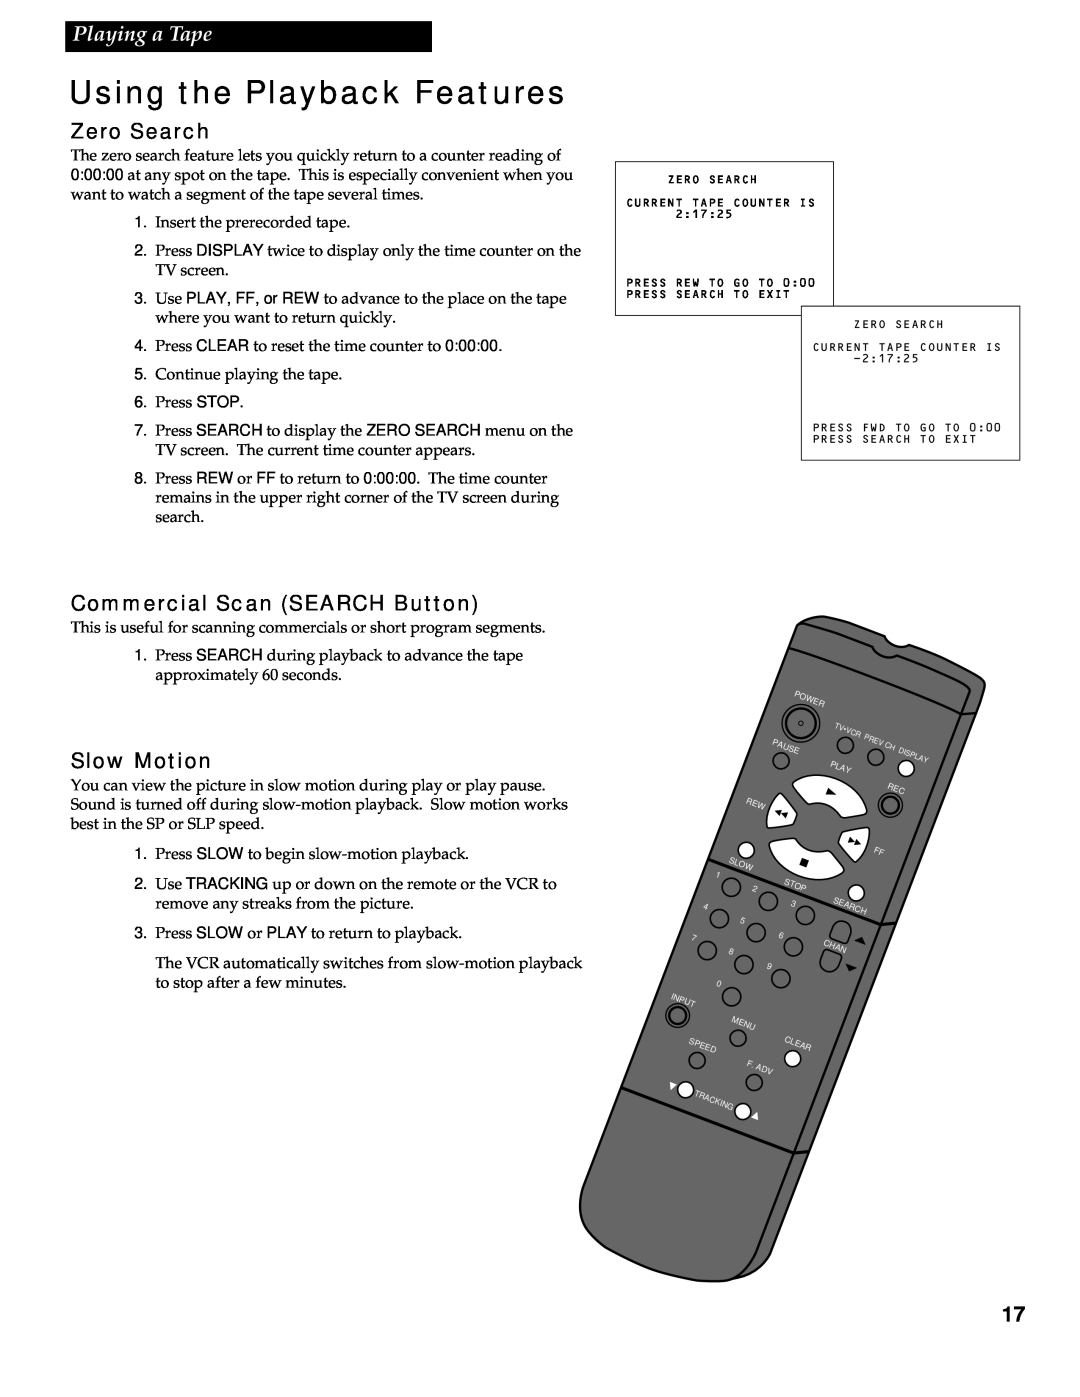 RCA VR602HF manual Zero Search, Commercial Scan SEARCH Button, Slow Motion, Using the Playback Features, Playing a Tape 